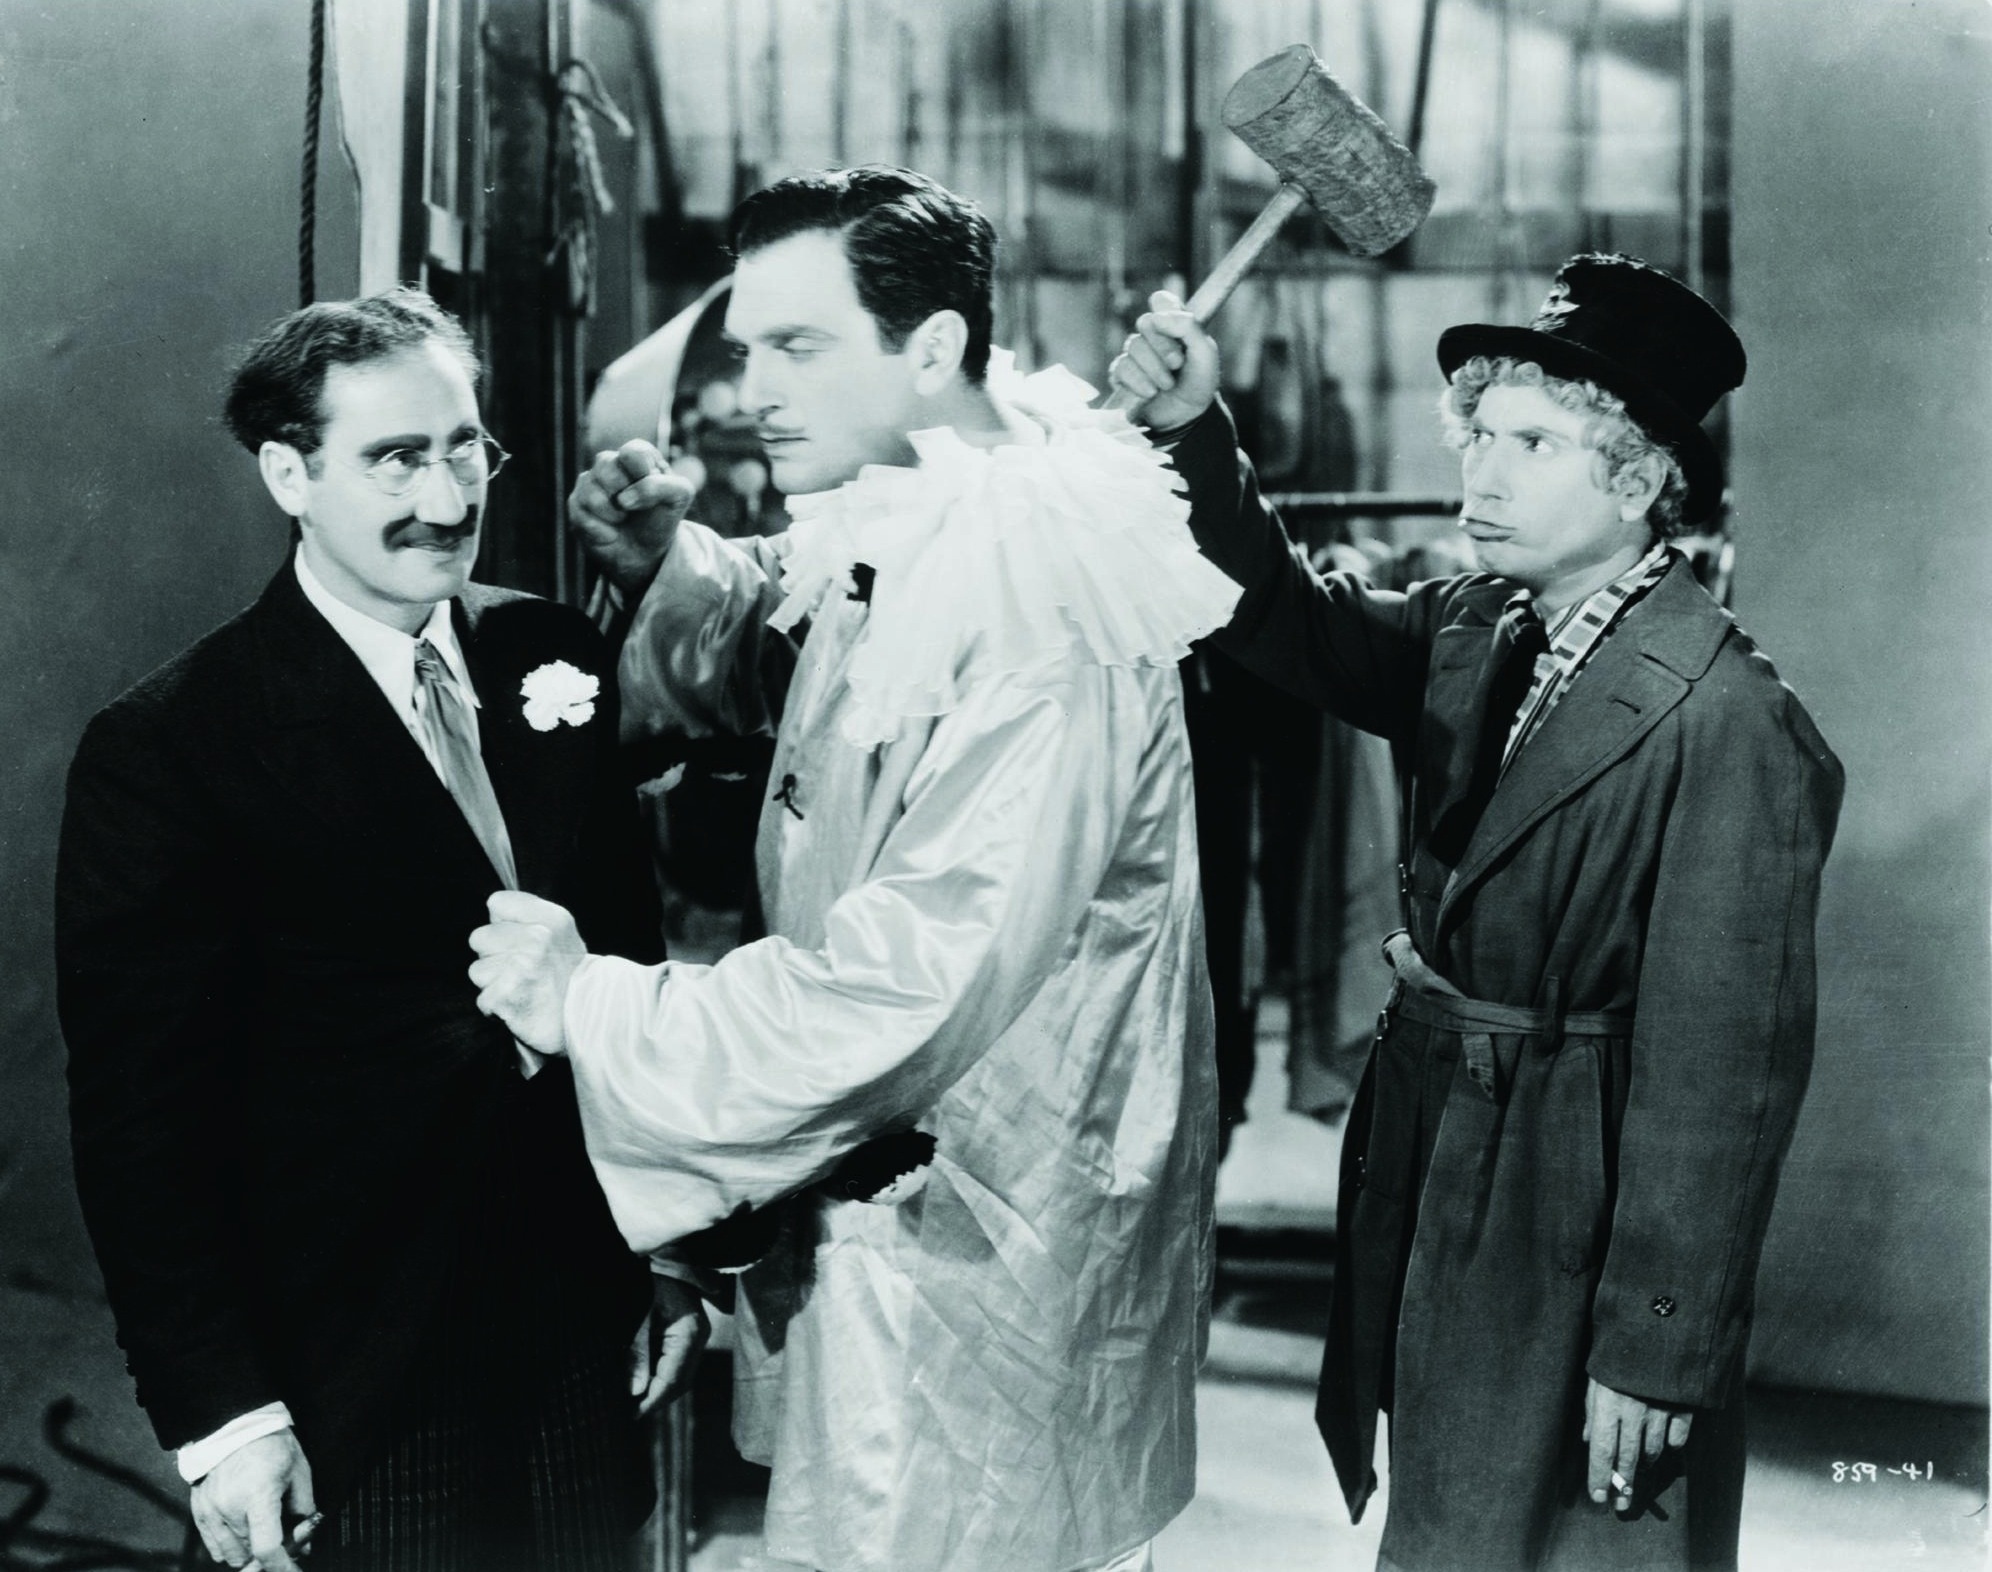 Still of Groucho Marx and Harpo Marx in A Night at the Opera (1935)